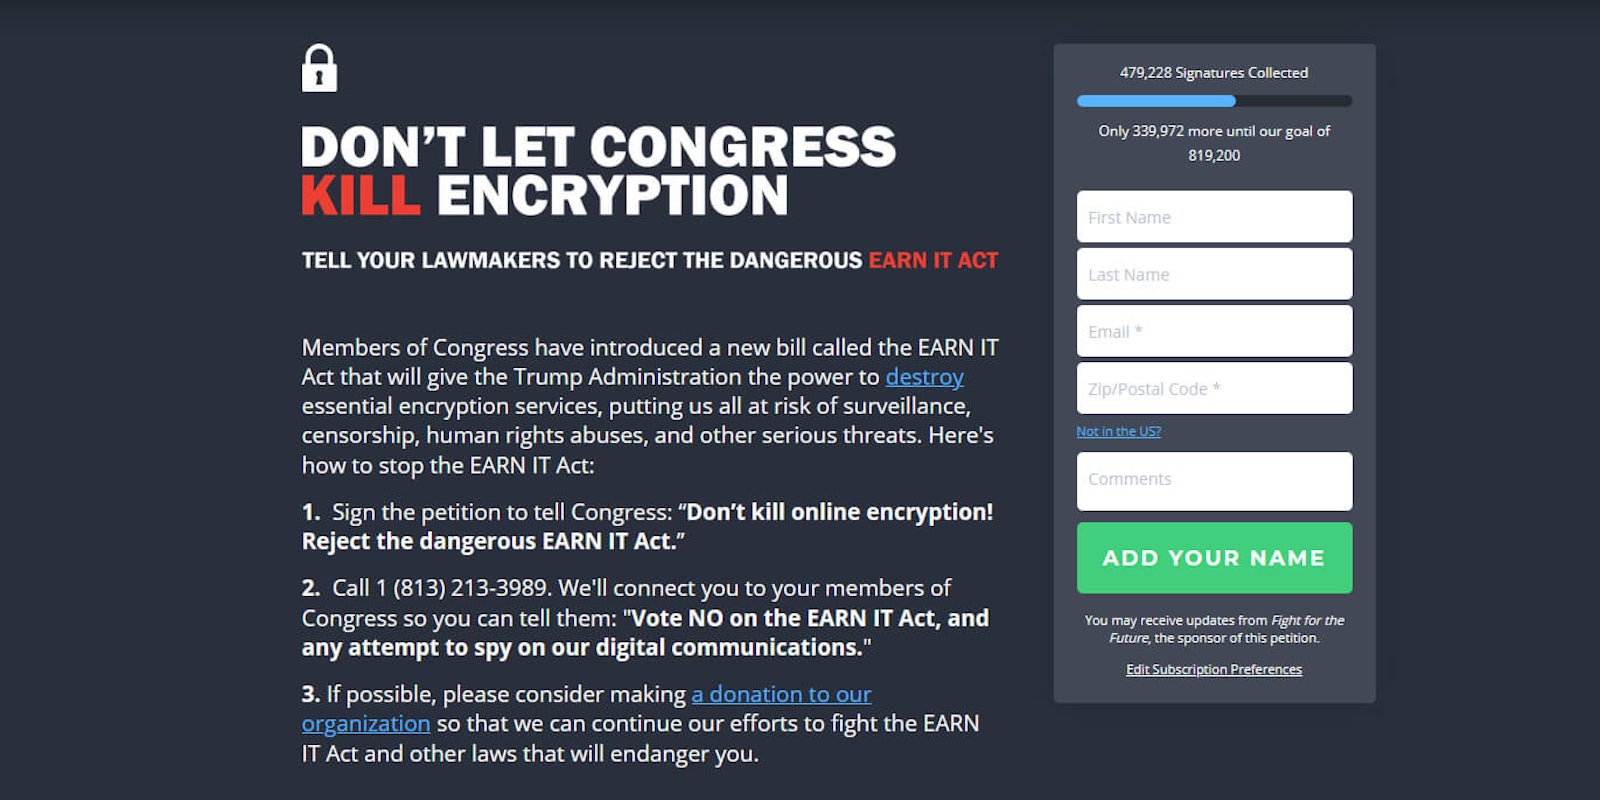 EARN IT Act Petition Fight for the Future Don't Let Congress Kill Encryption